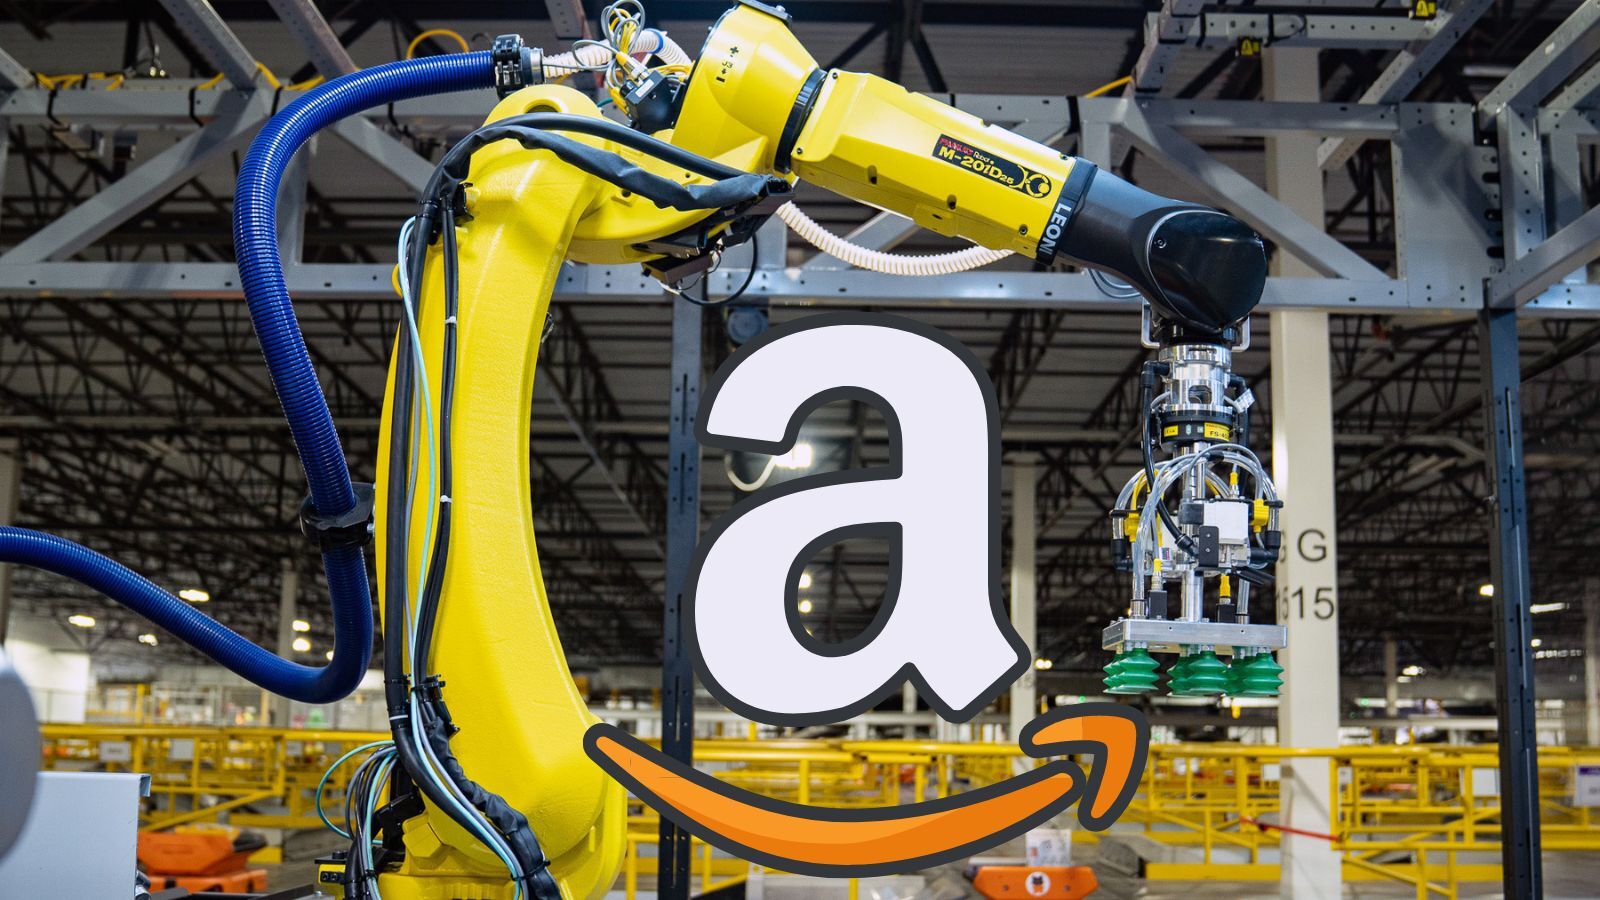 Does Amazon Use Robots? (All You Need to Know)